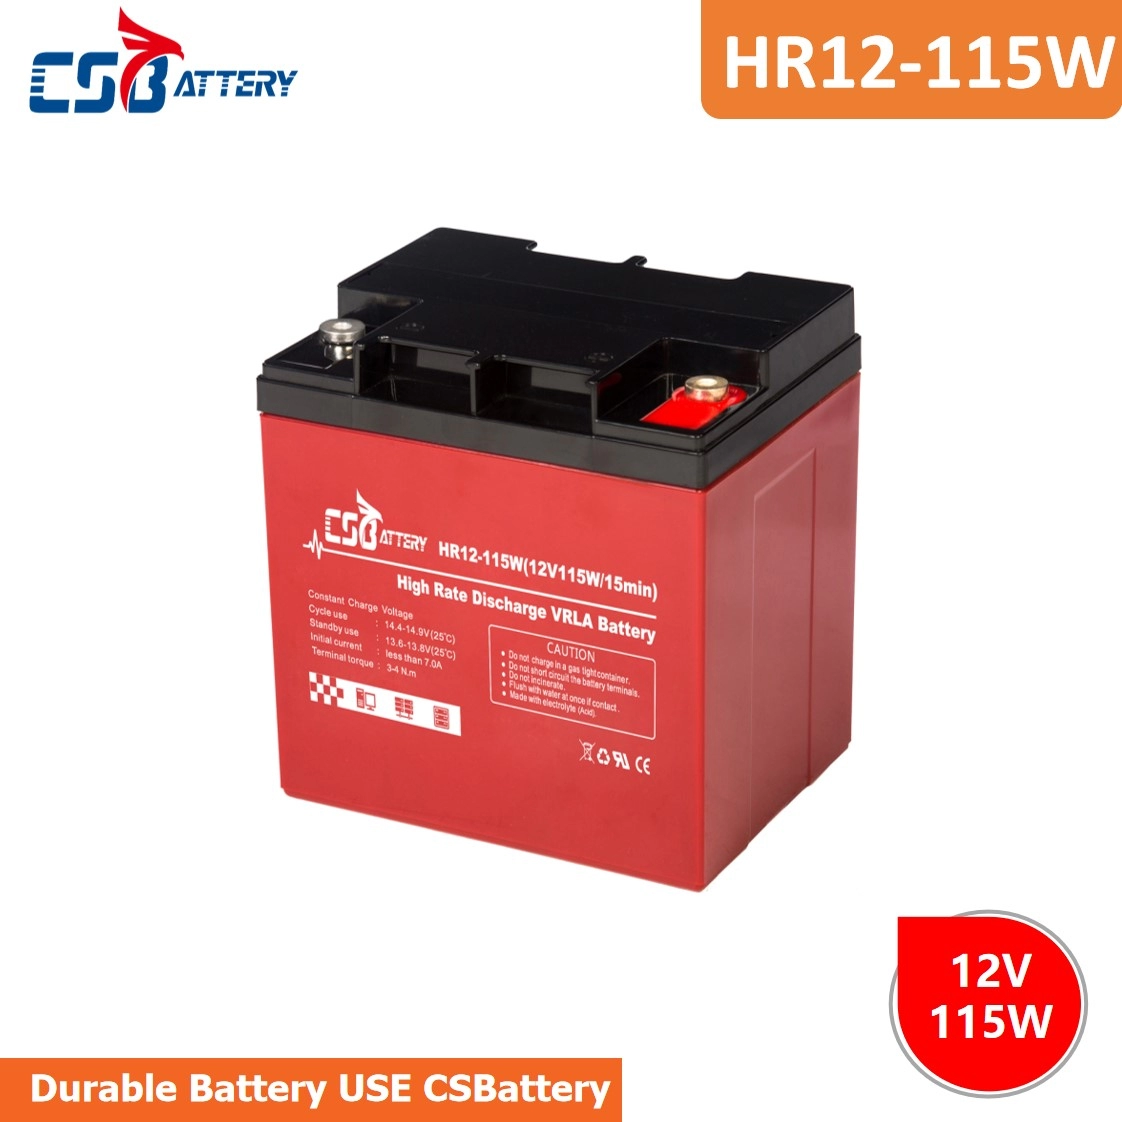 HR12-900W High Discharge Rate Battery